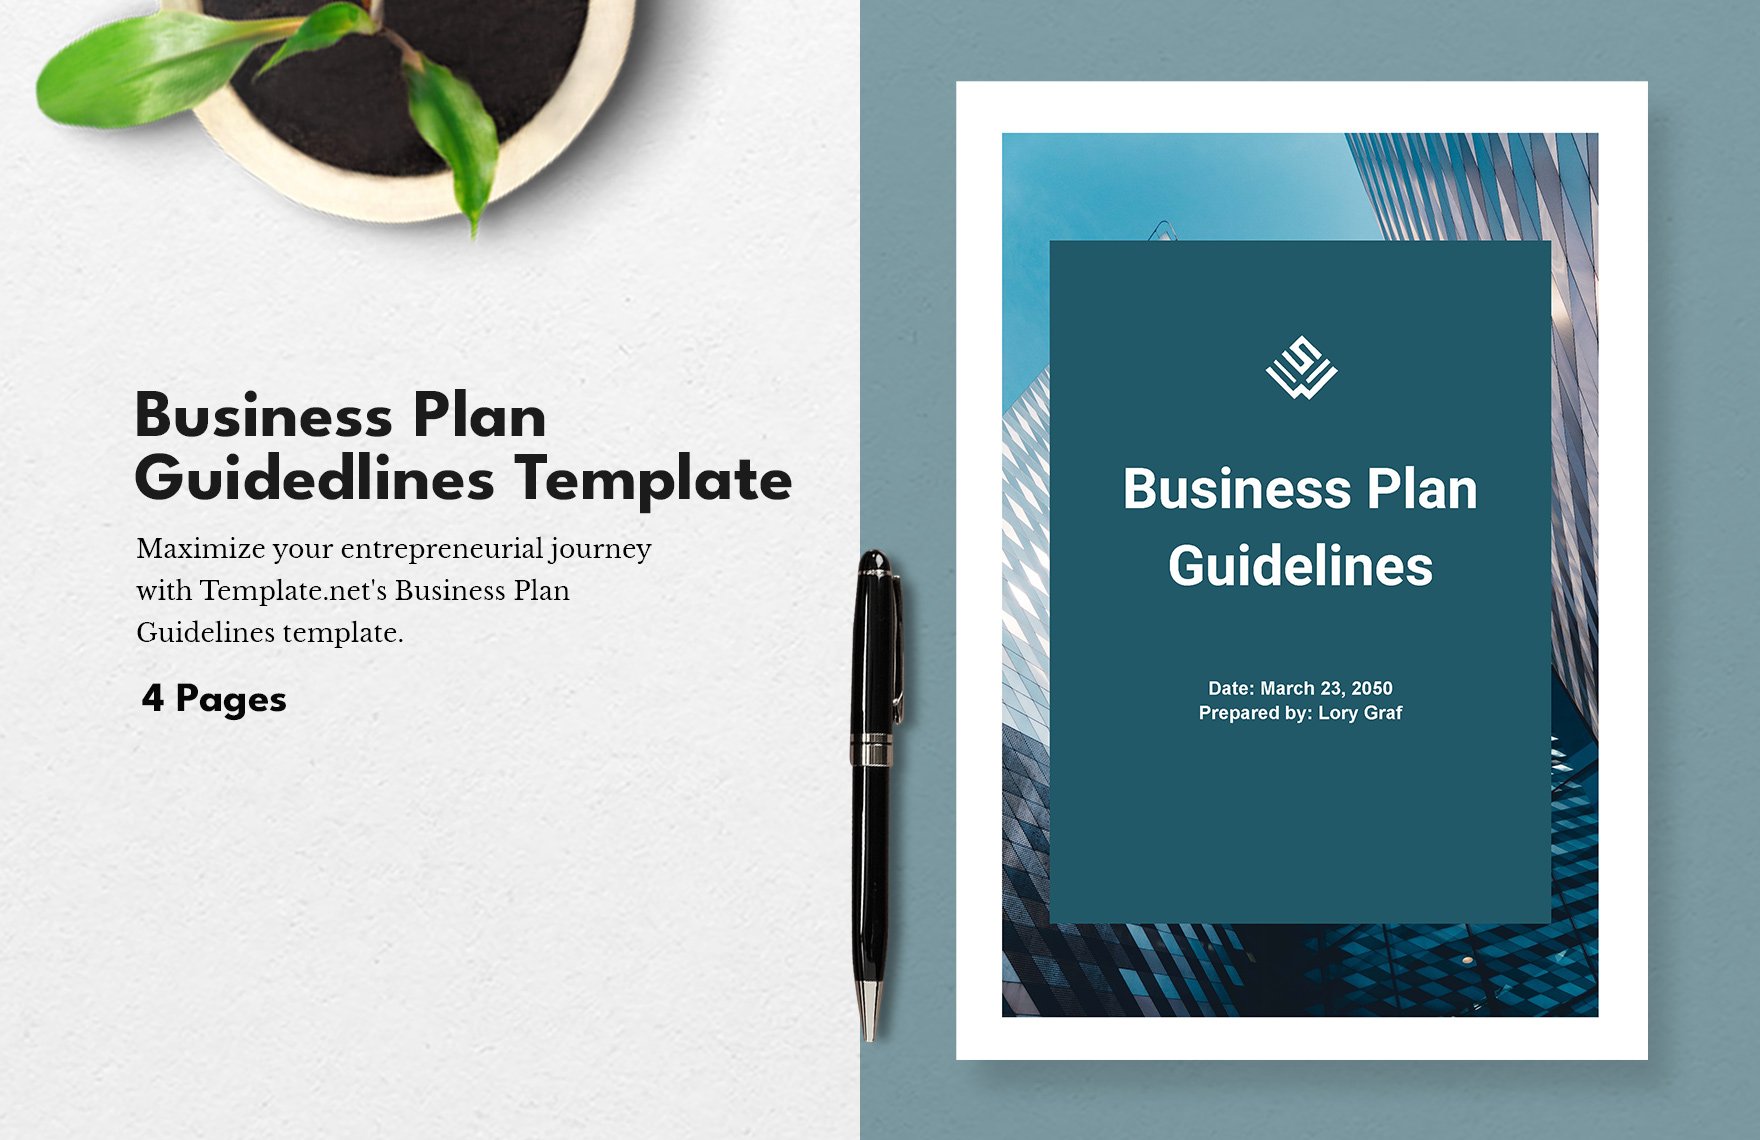 Business Plan Guidelines Template in Word, Google Docs, PDF